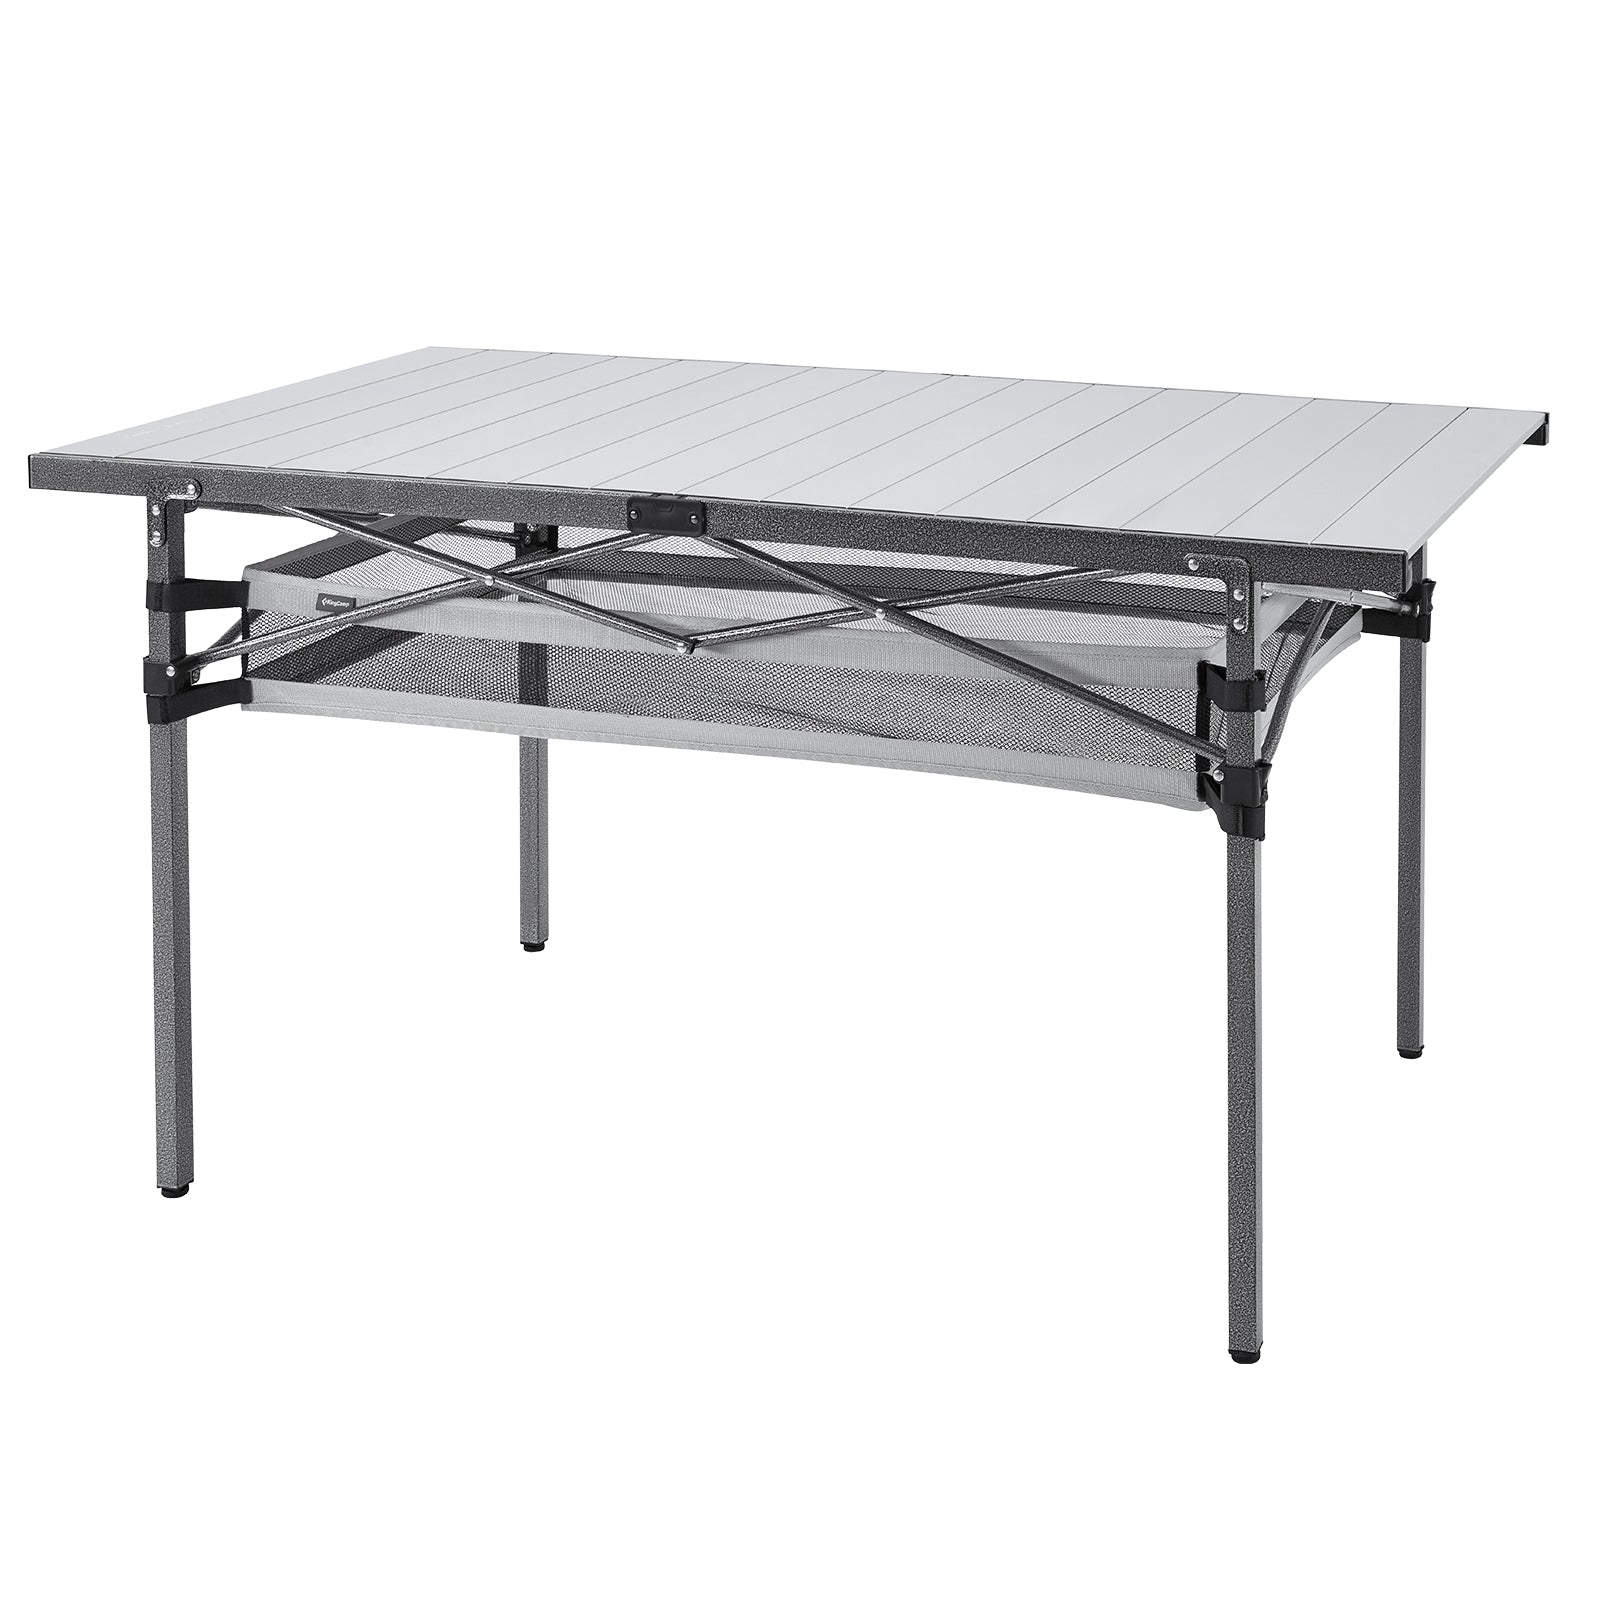 KingCamp Aluminum Roll Up Table with Storage Layer